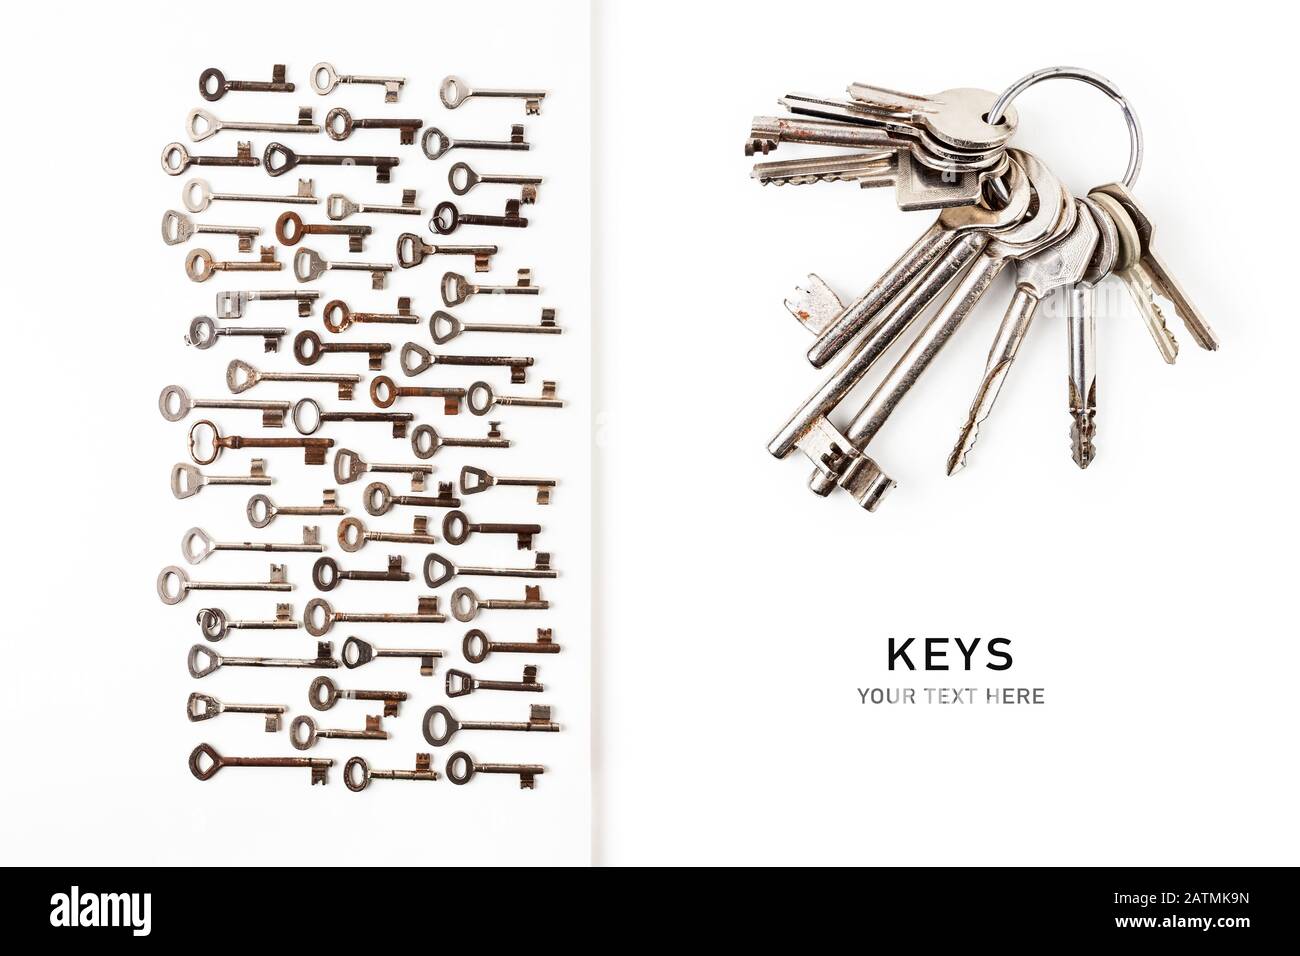 Keys on key ring creative layout isolated on white background. Design element, top view, flat lay. Security concept Stock Photo